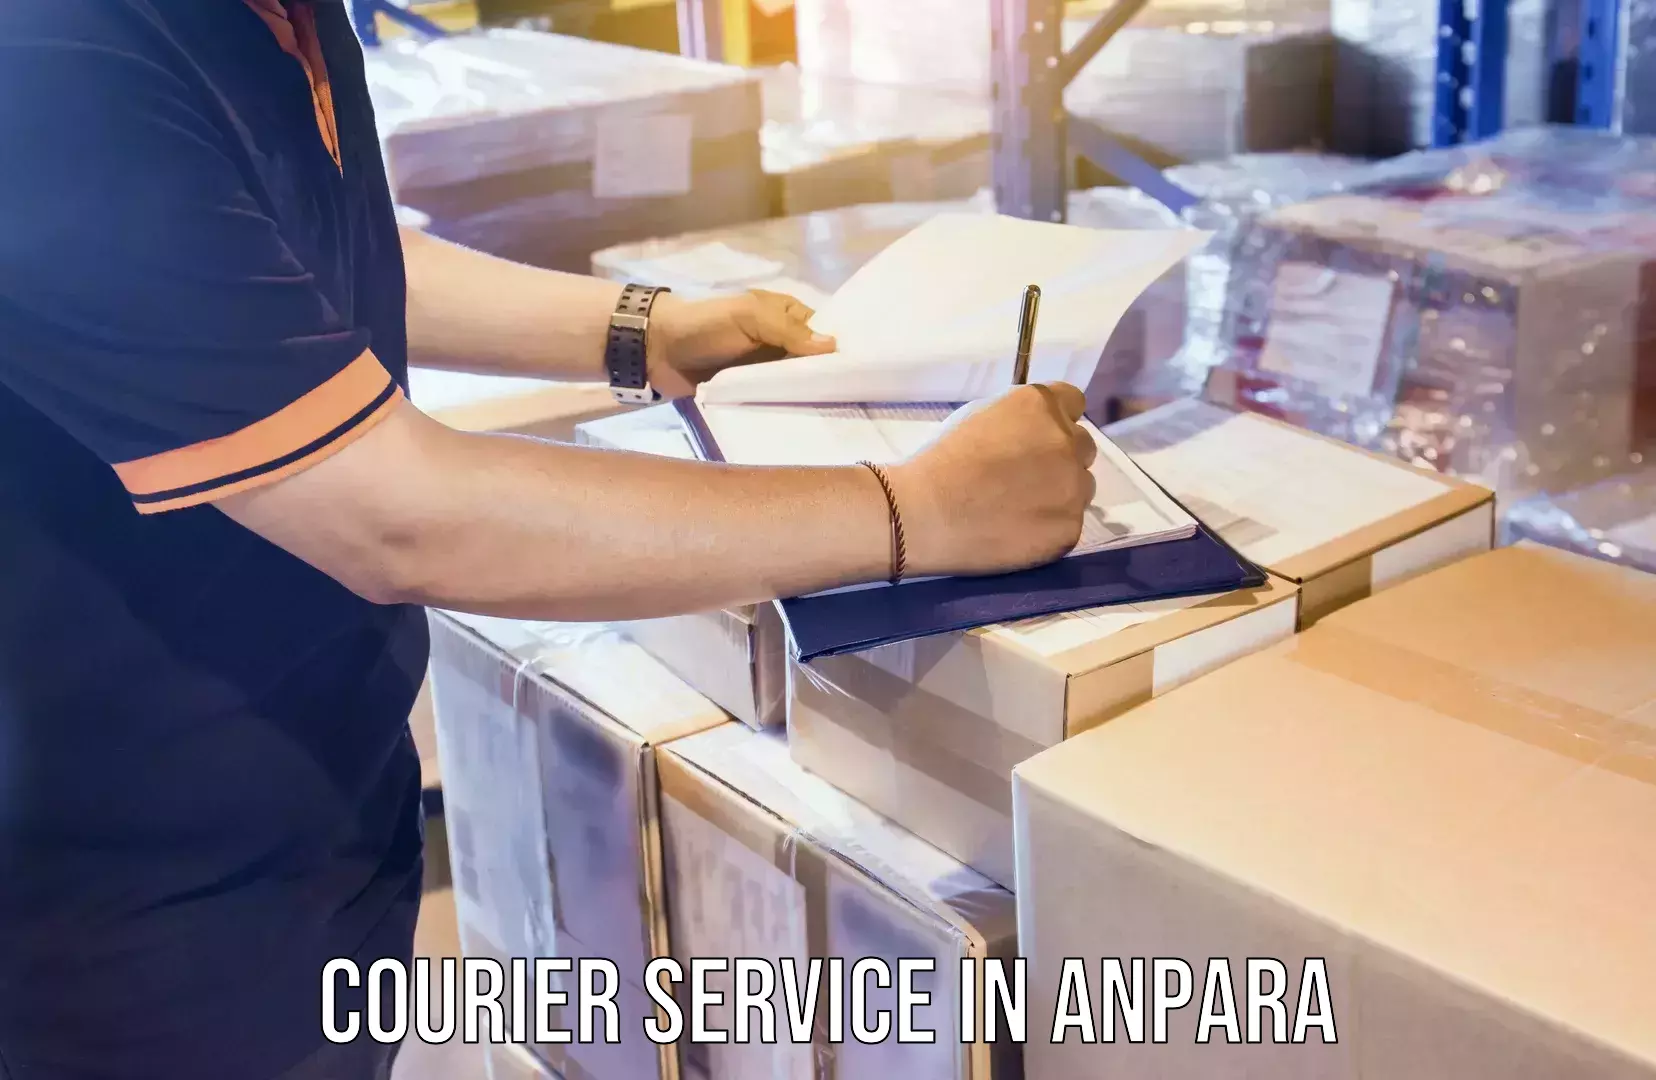 Express postal services in Anpara